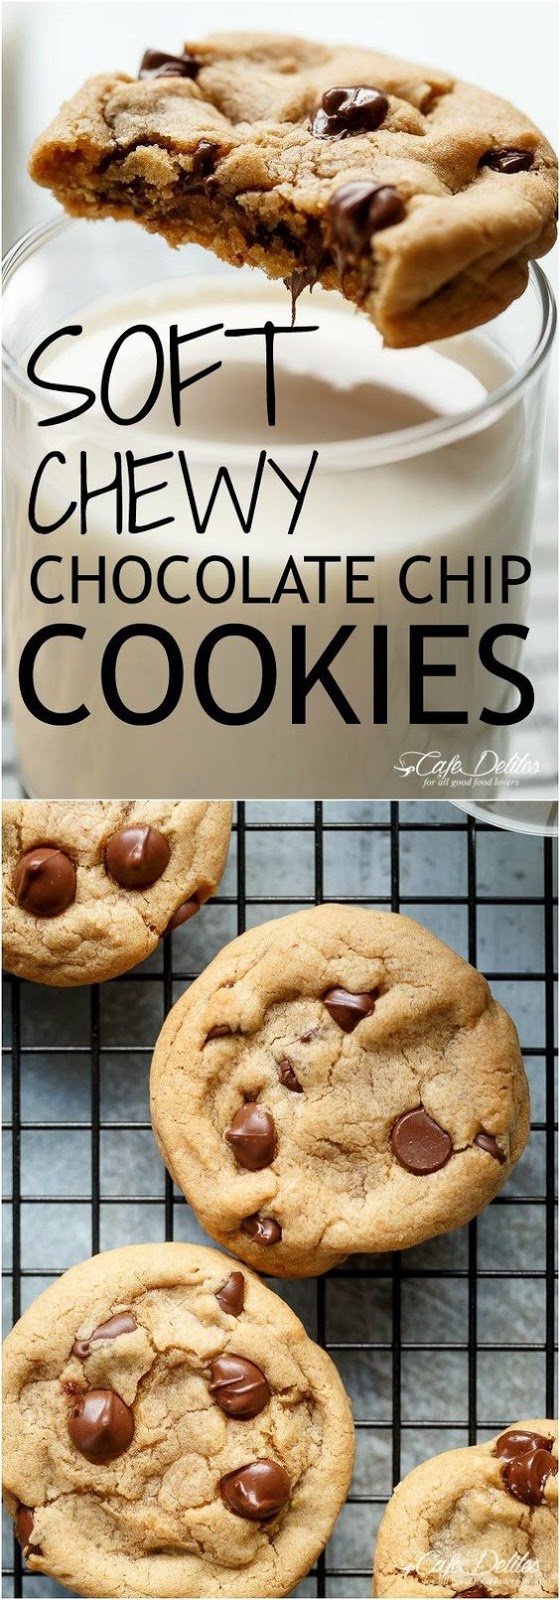 Soft Chewy Crisp Chocolate Chip Cookies - Girl has a dishes